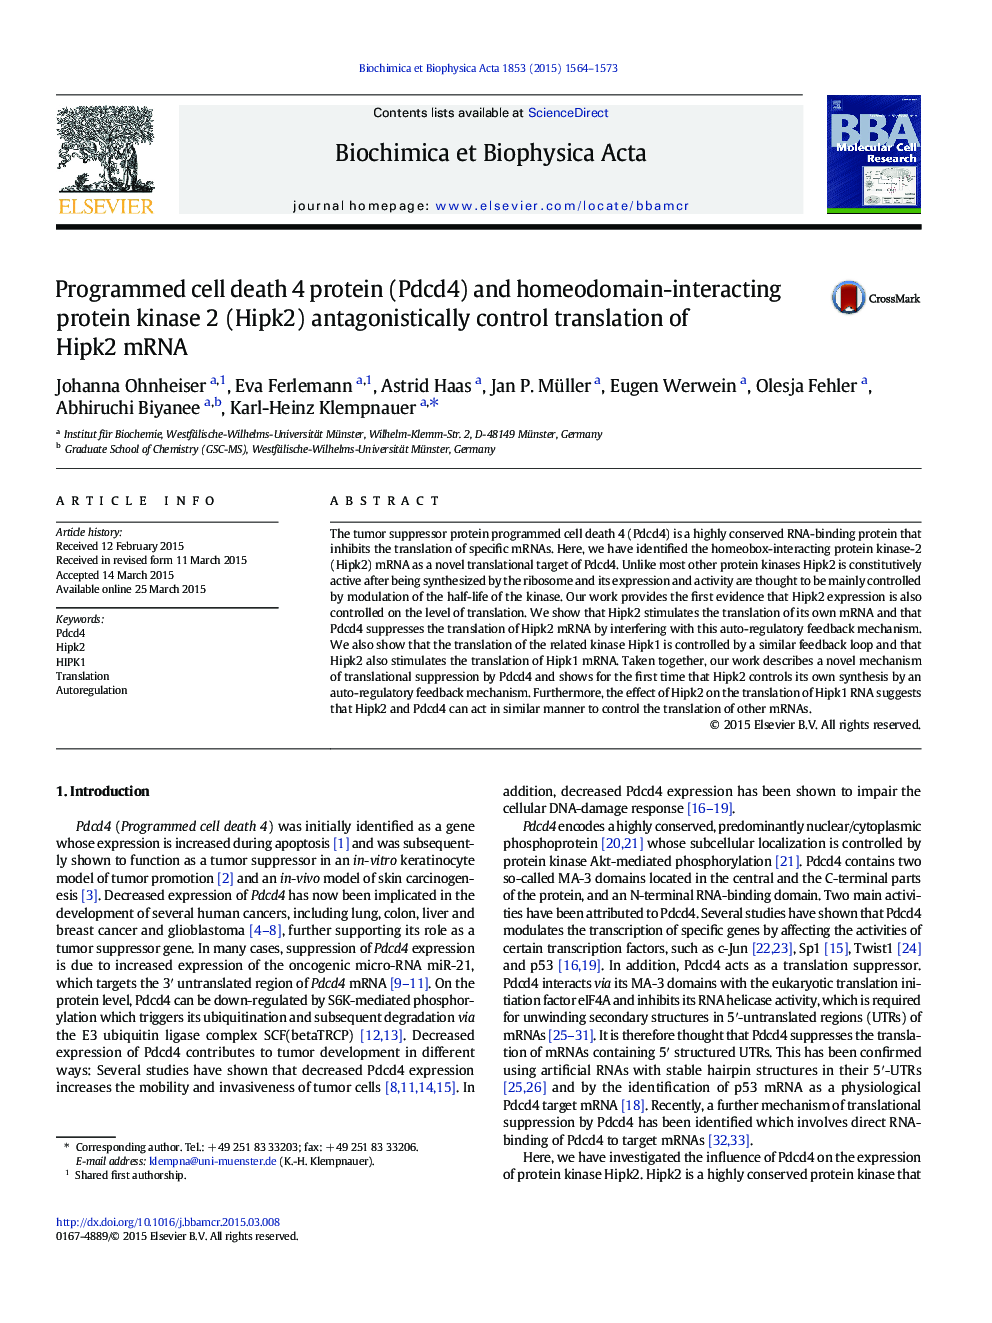 Programmed cell death 4 protein (Pdcd4) and homeodomain-interacting protein kinase 2 (Hipk2) antagonistically control translation of Hipk2 mRNA